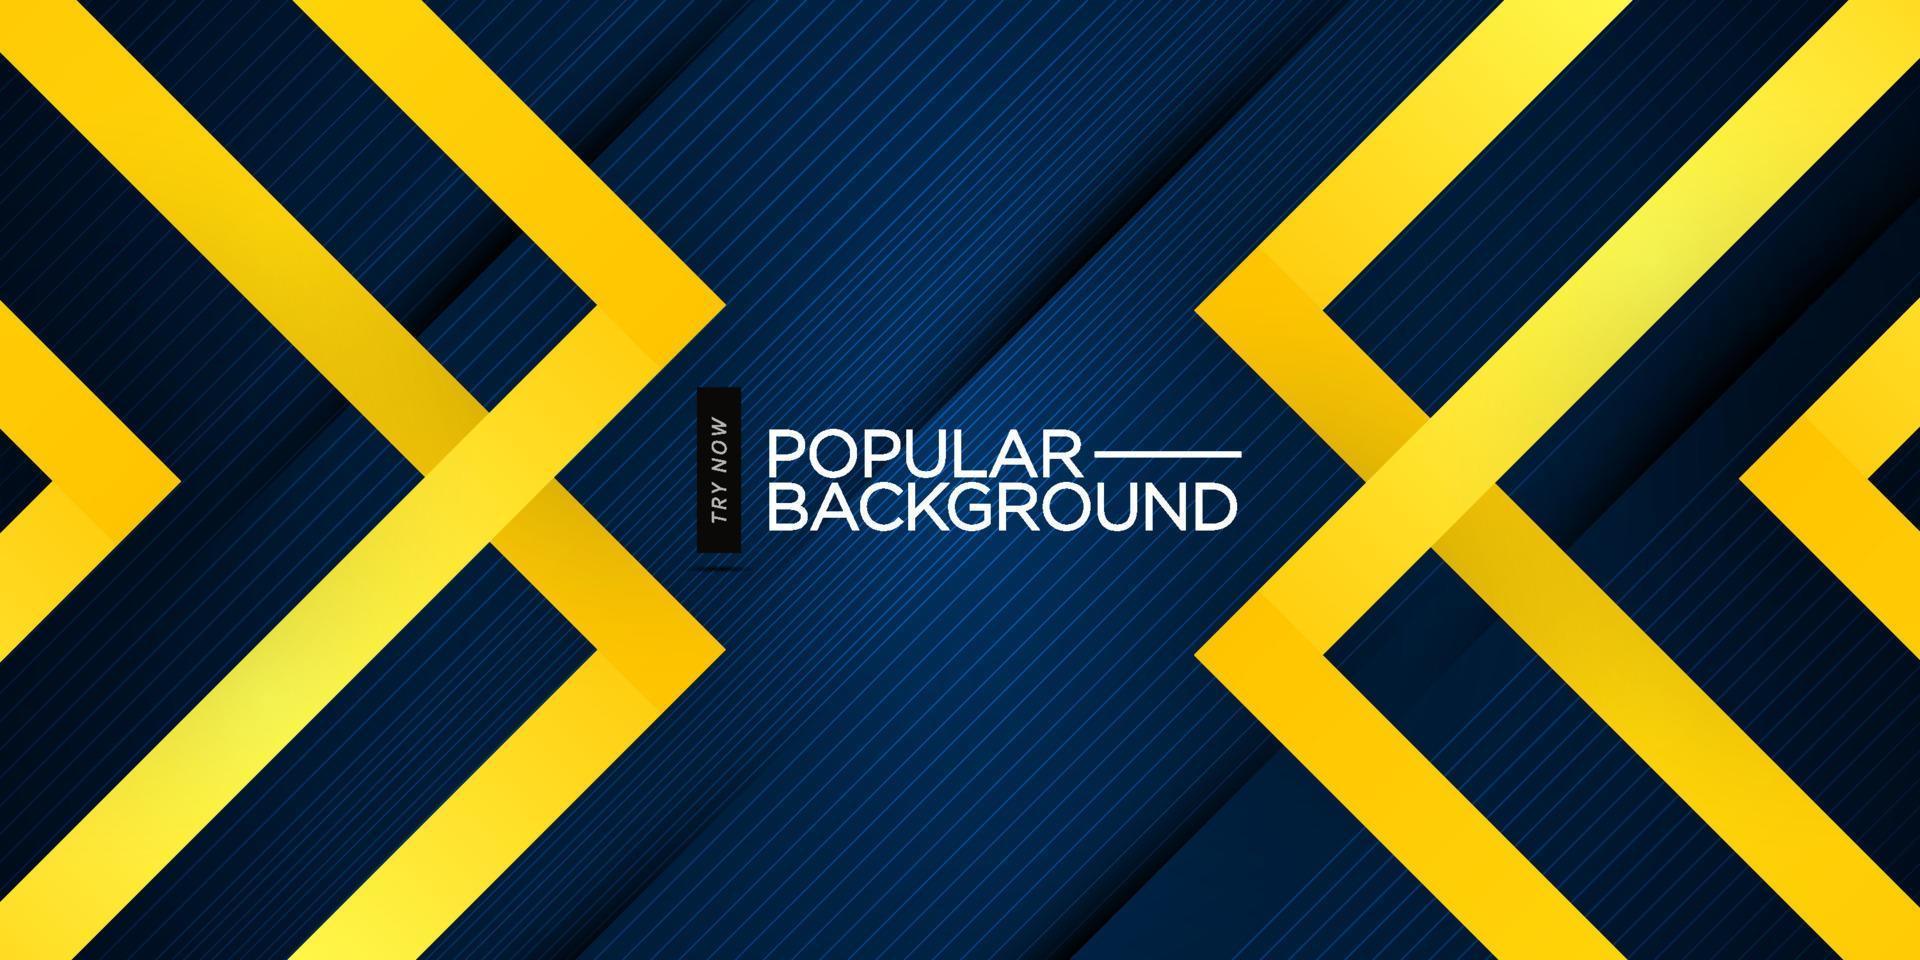 Sporty geometric abstract background dark blue with yellow stripes and arrows concept.Bright purple banner.Eps10 vector